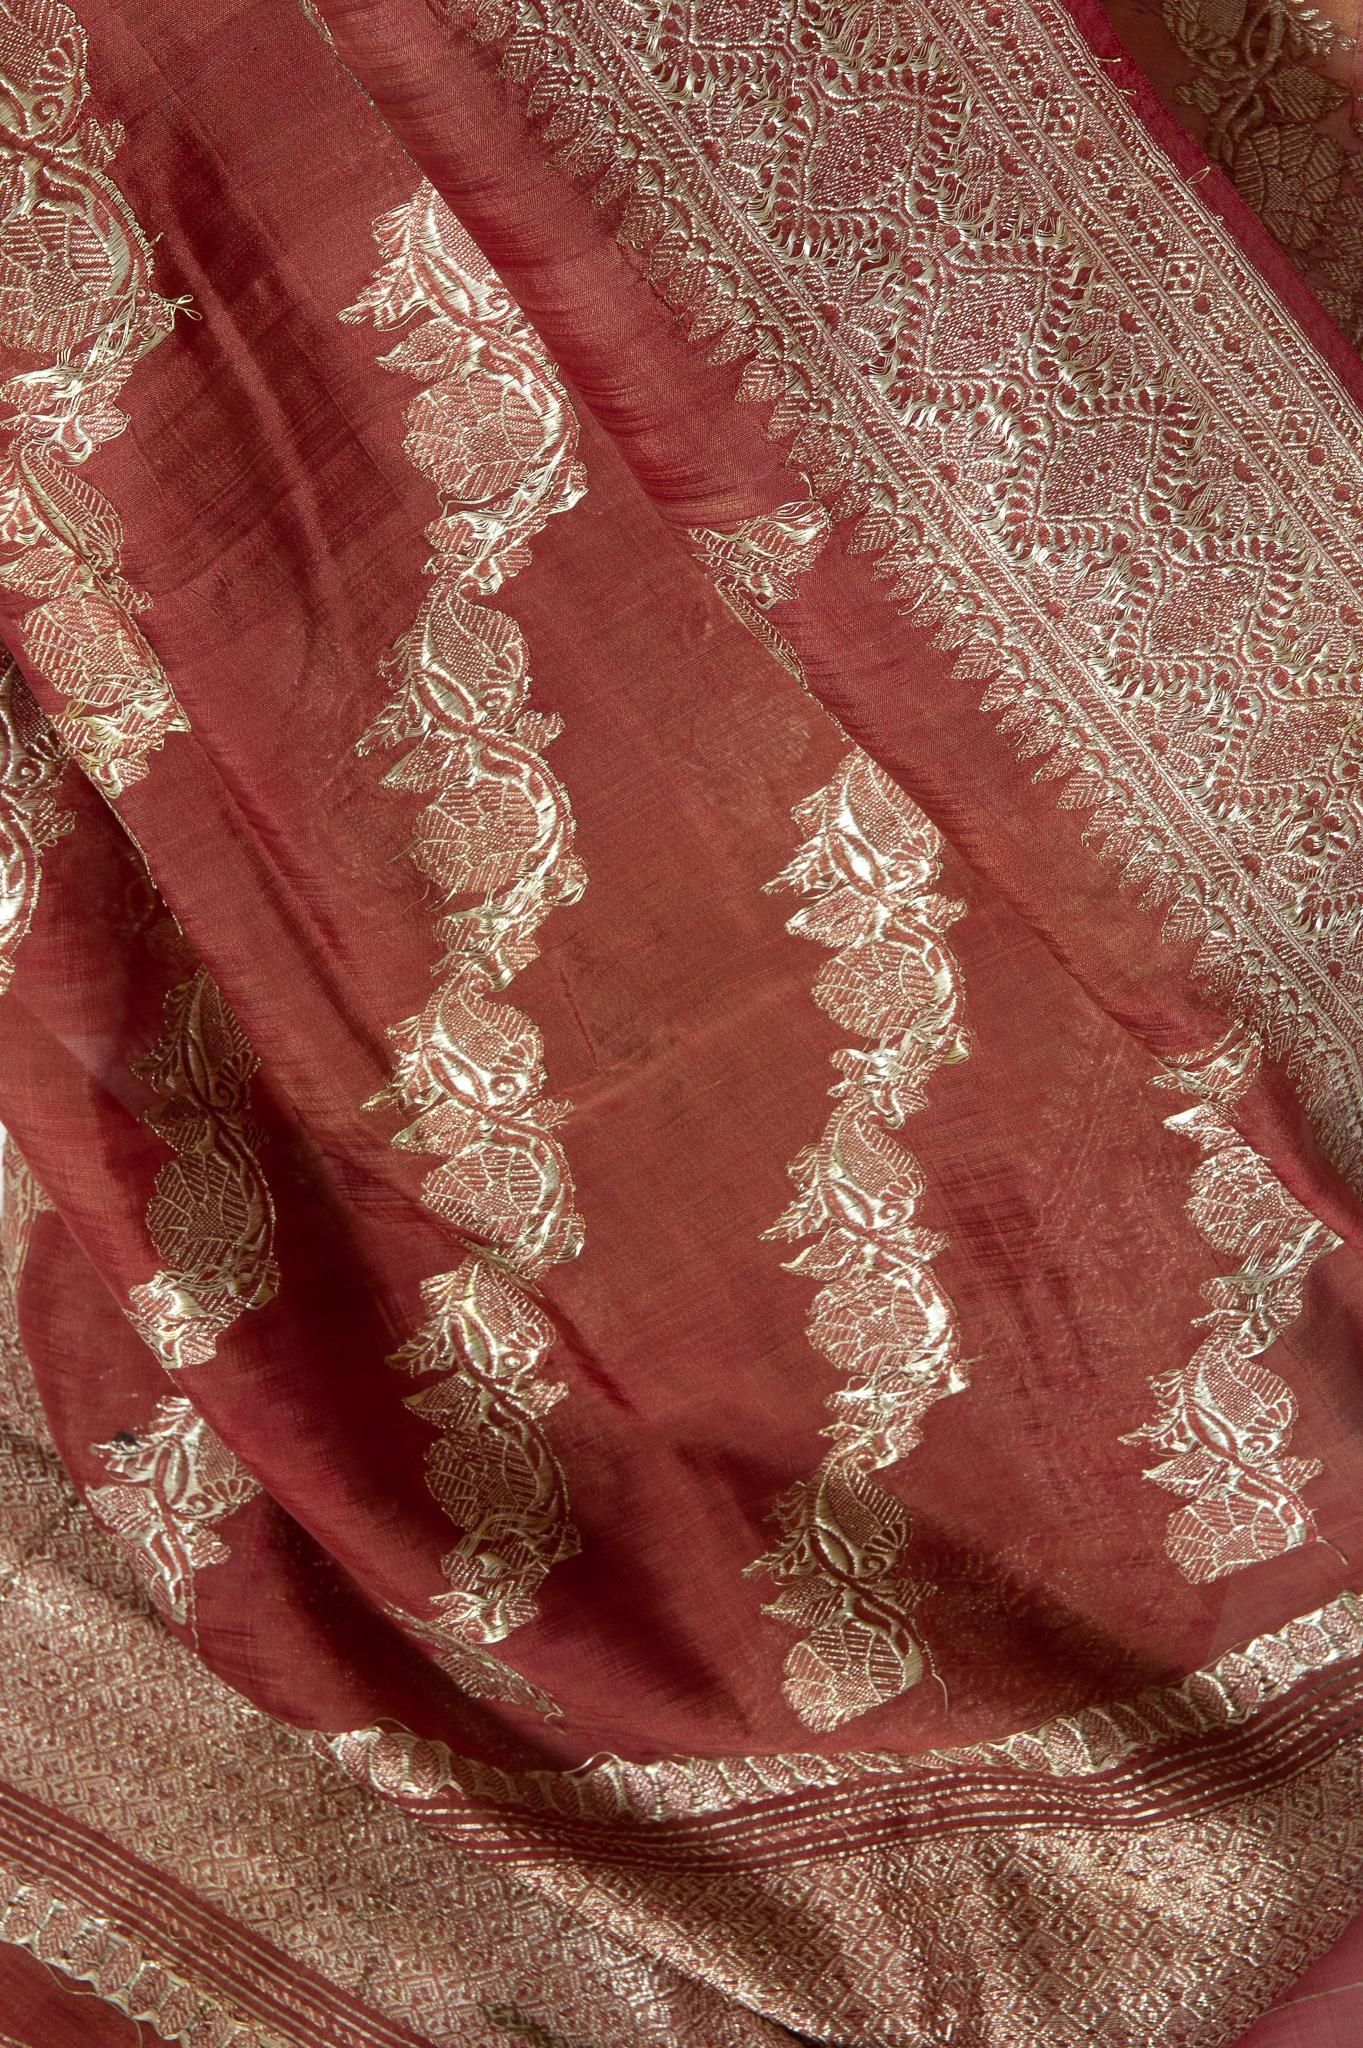 Synthetic Vintage Indian Sari Mauve Color for Curtains or Evening Dress For Sale